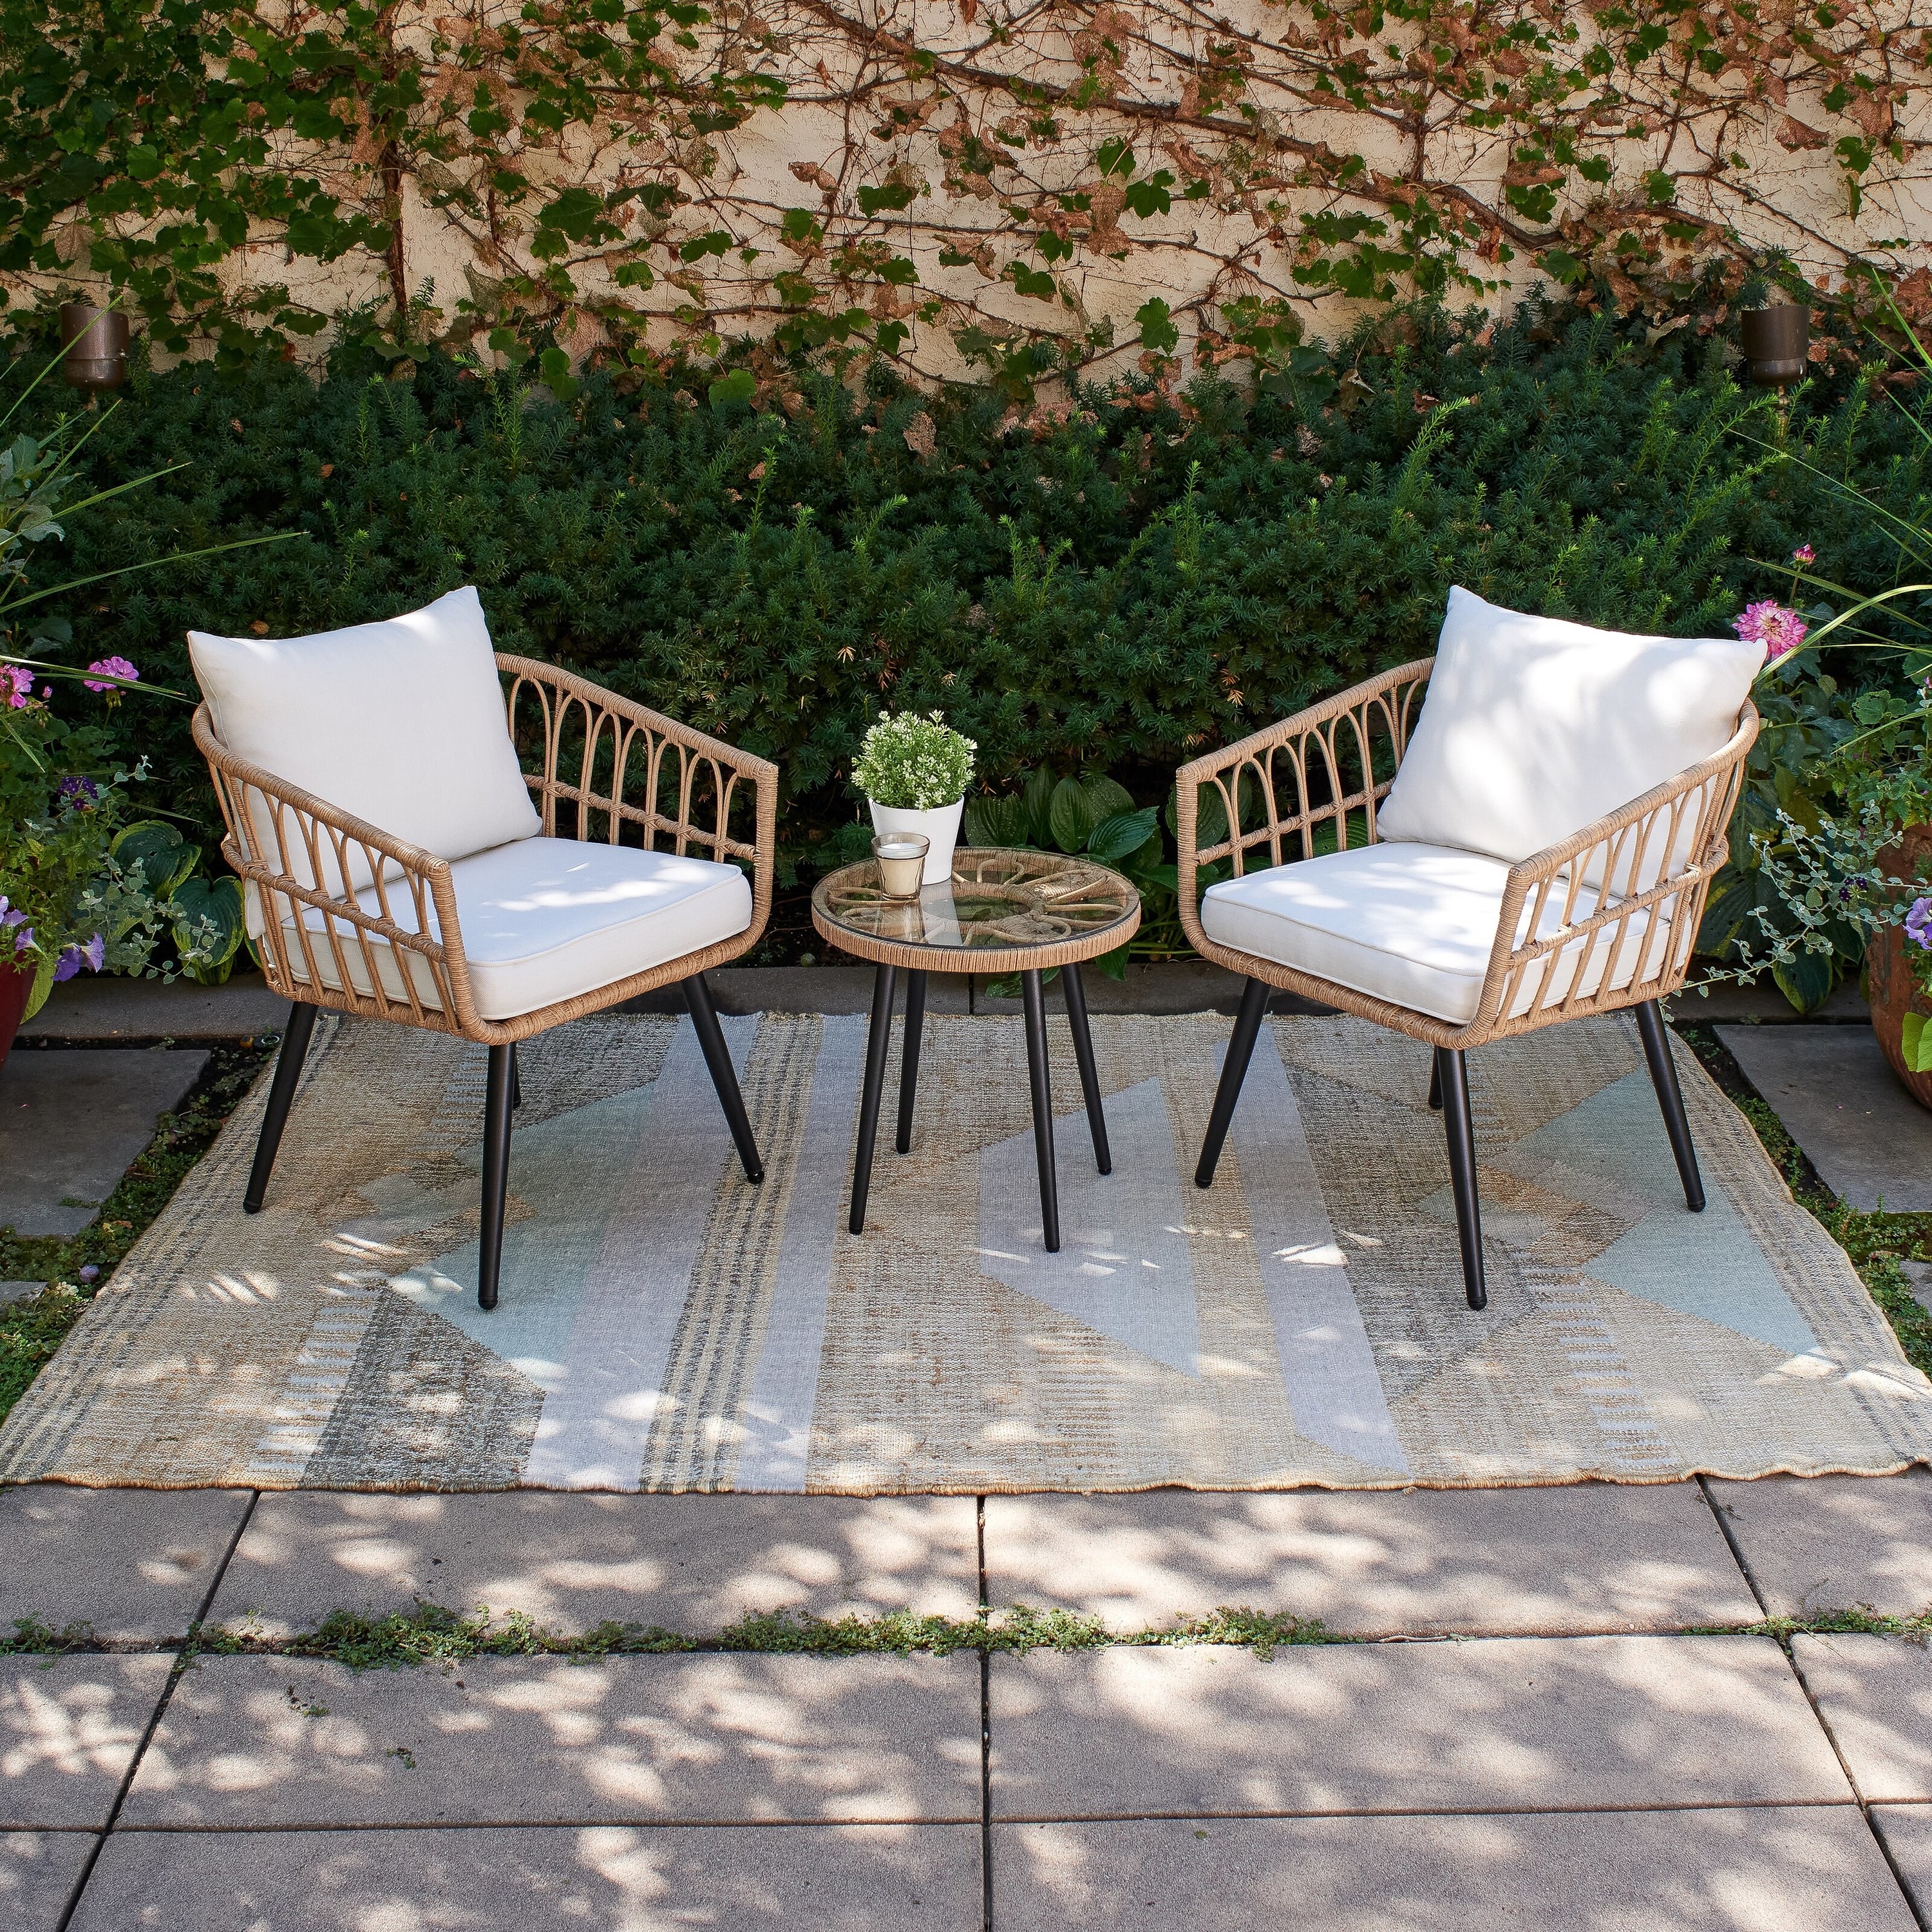 The two chairs and table on an outdoor rug